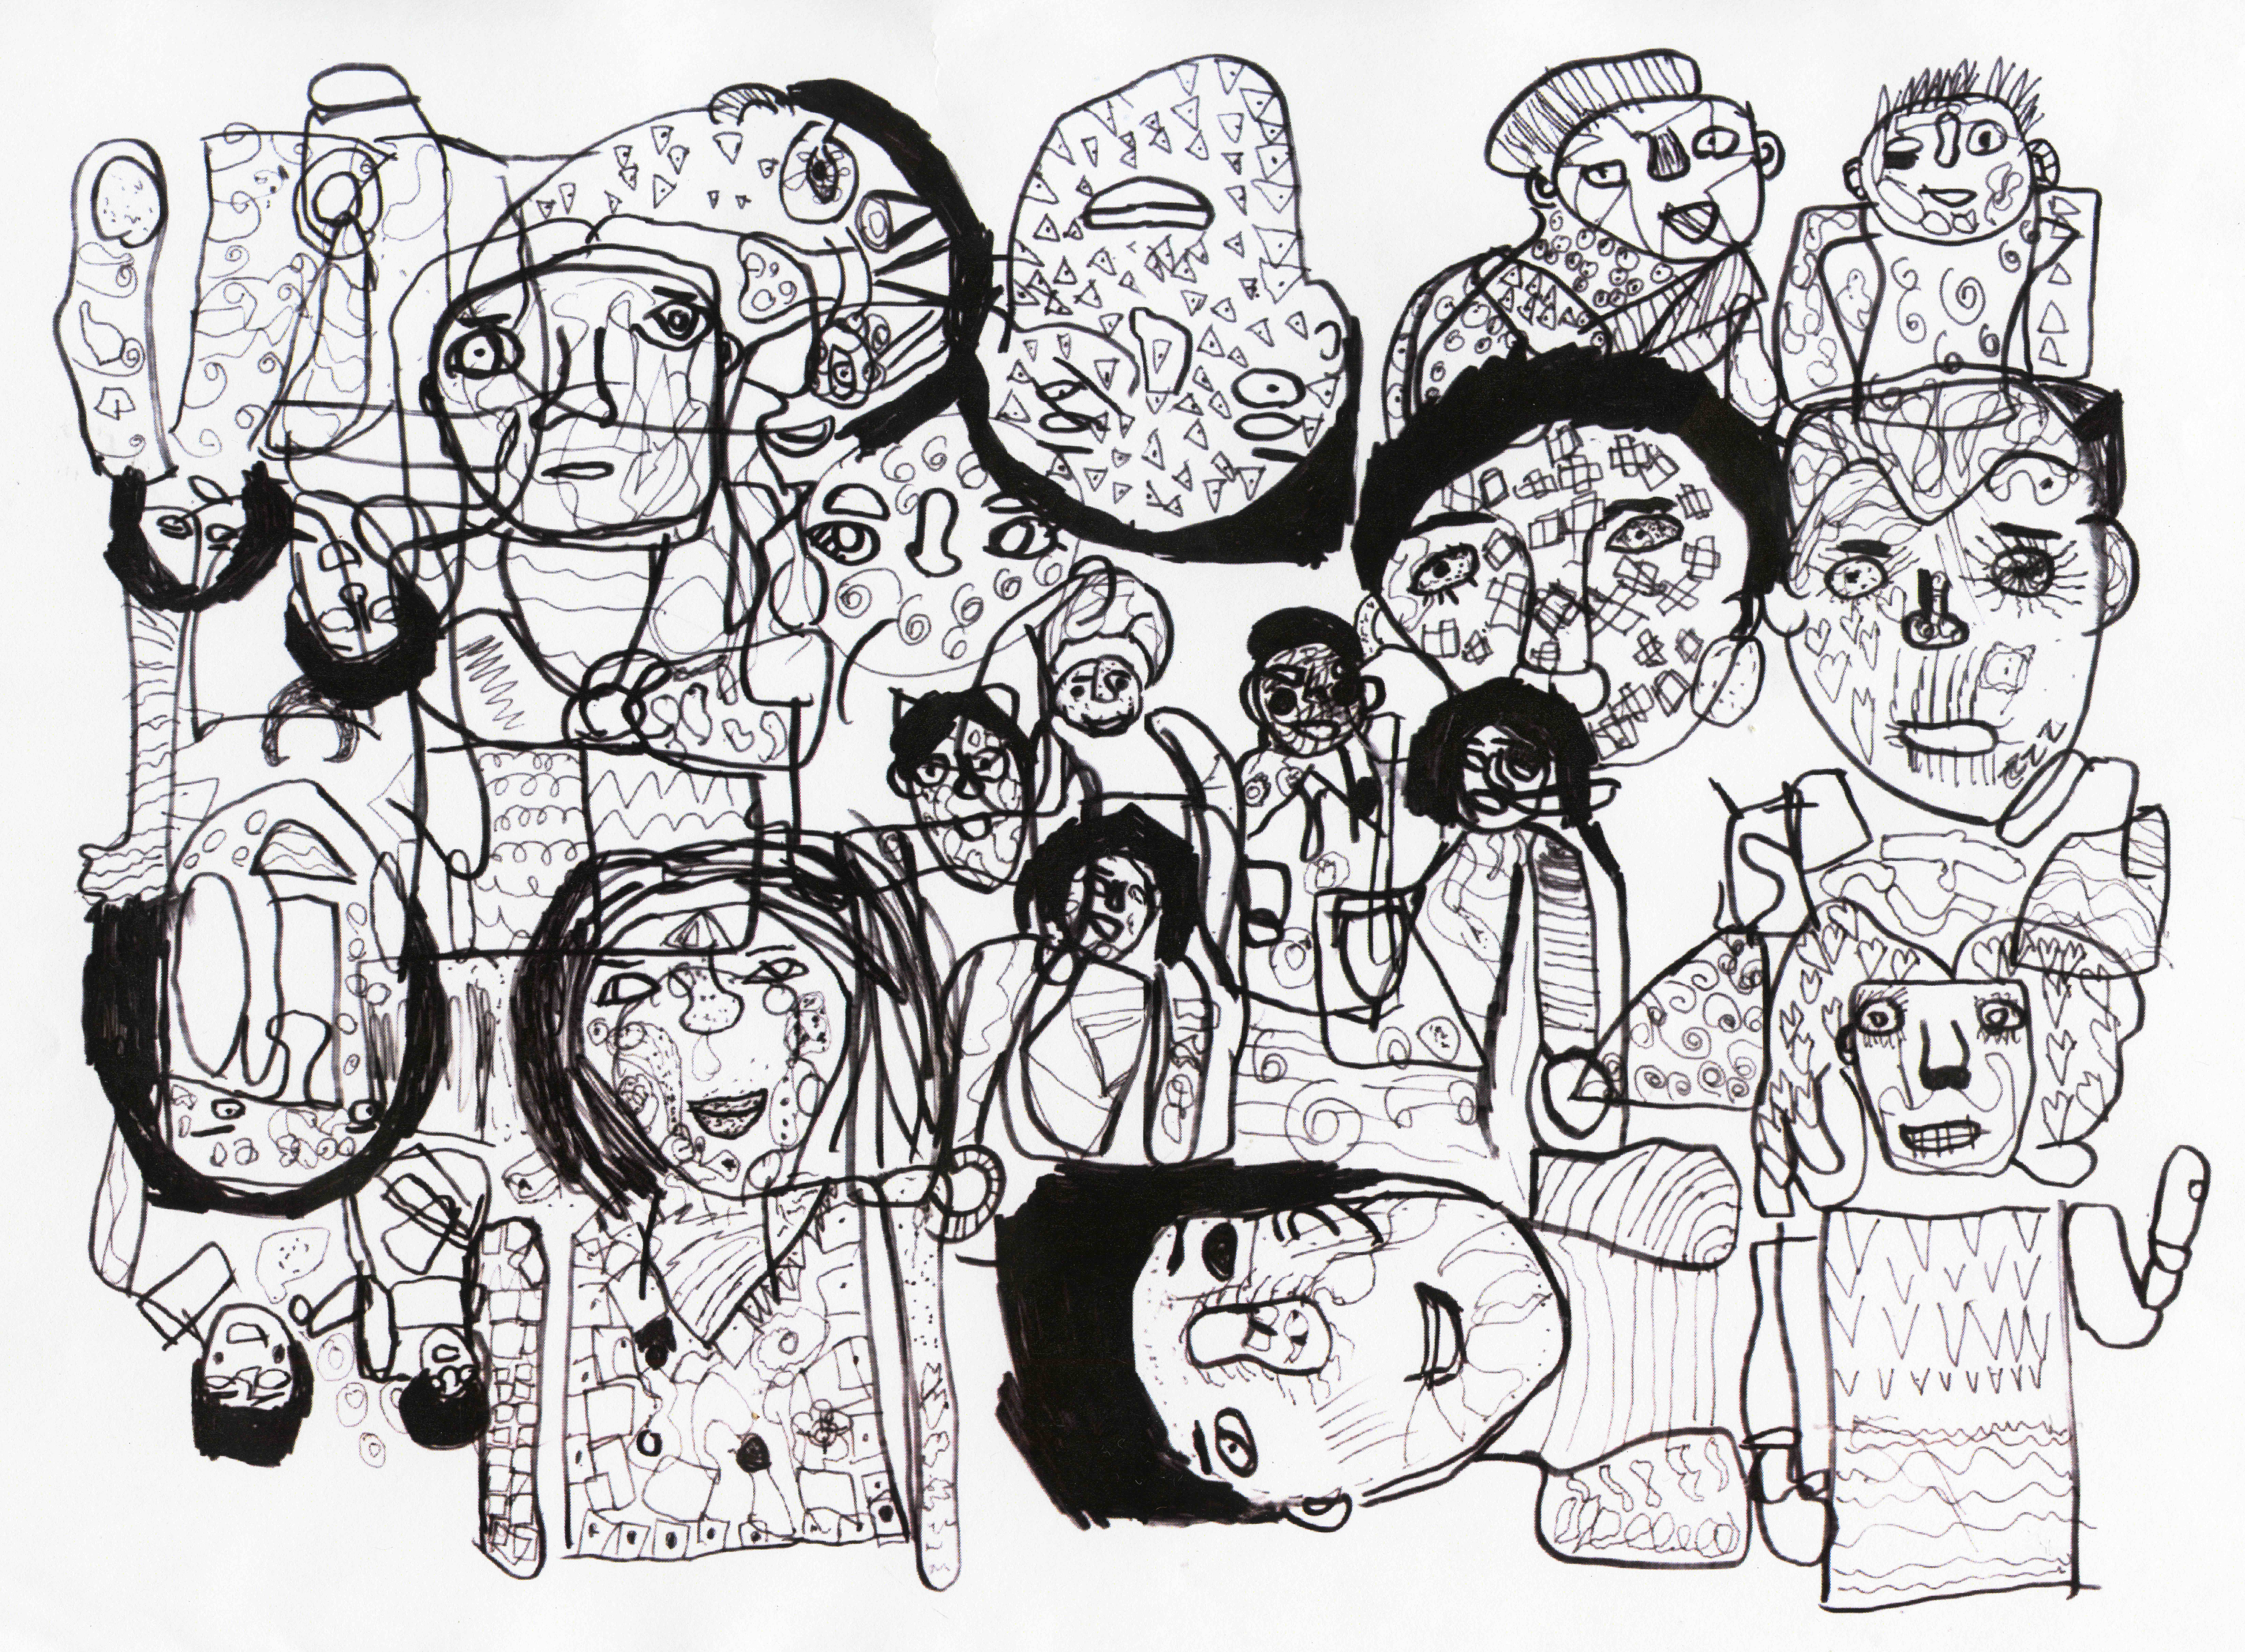 Black and white illustration by Amy Ellison with lots of characters and faces all overlapping